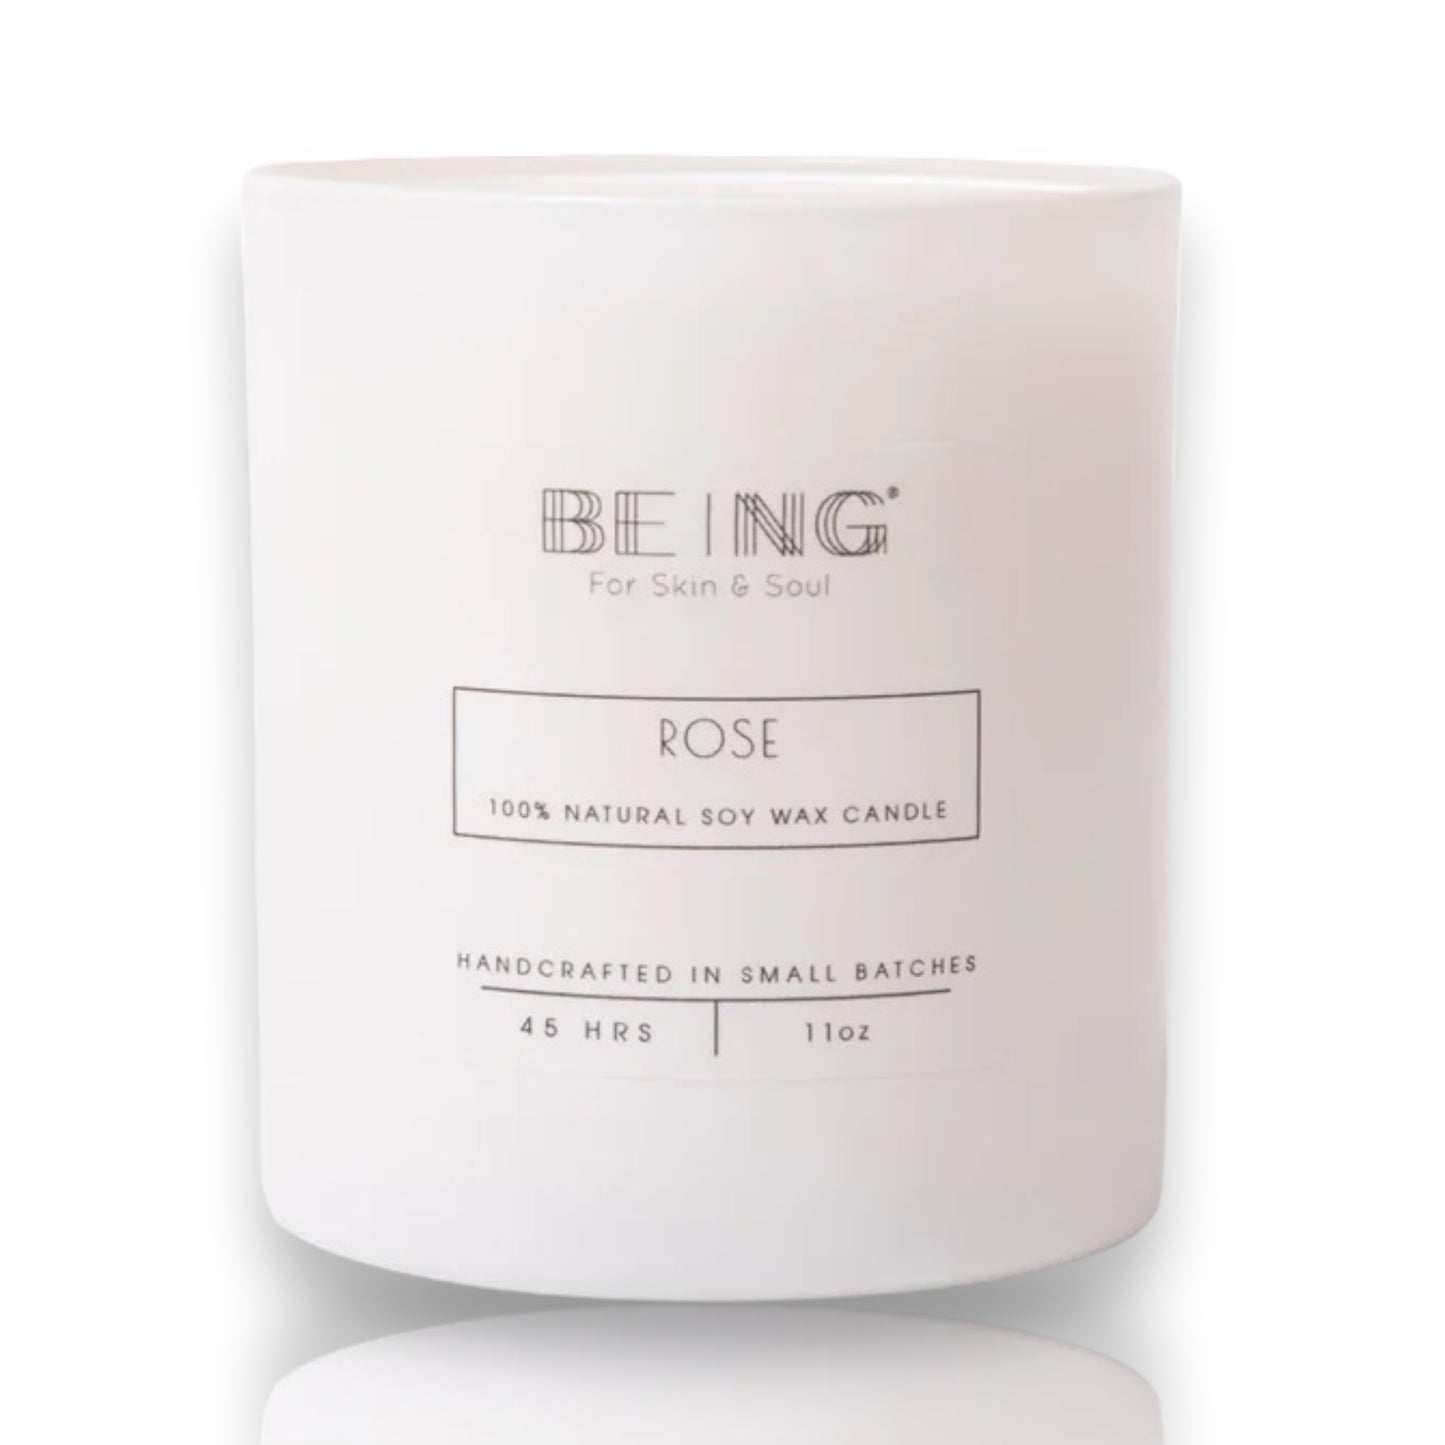 Rose Soy Wax Candle - LIVE BY BEING